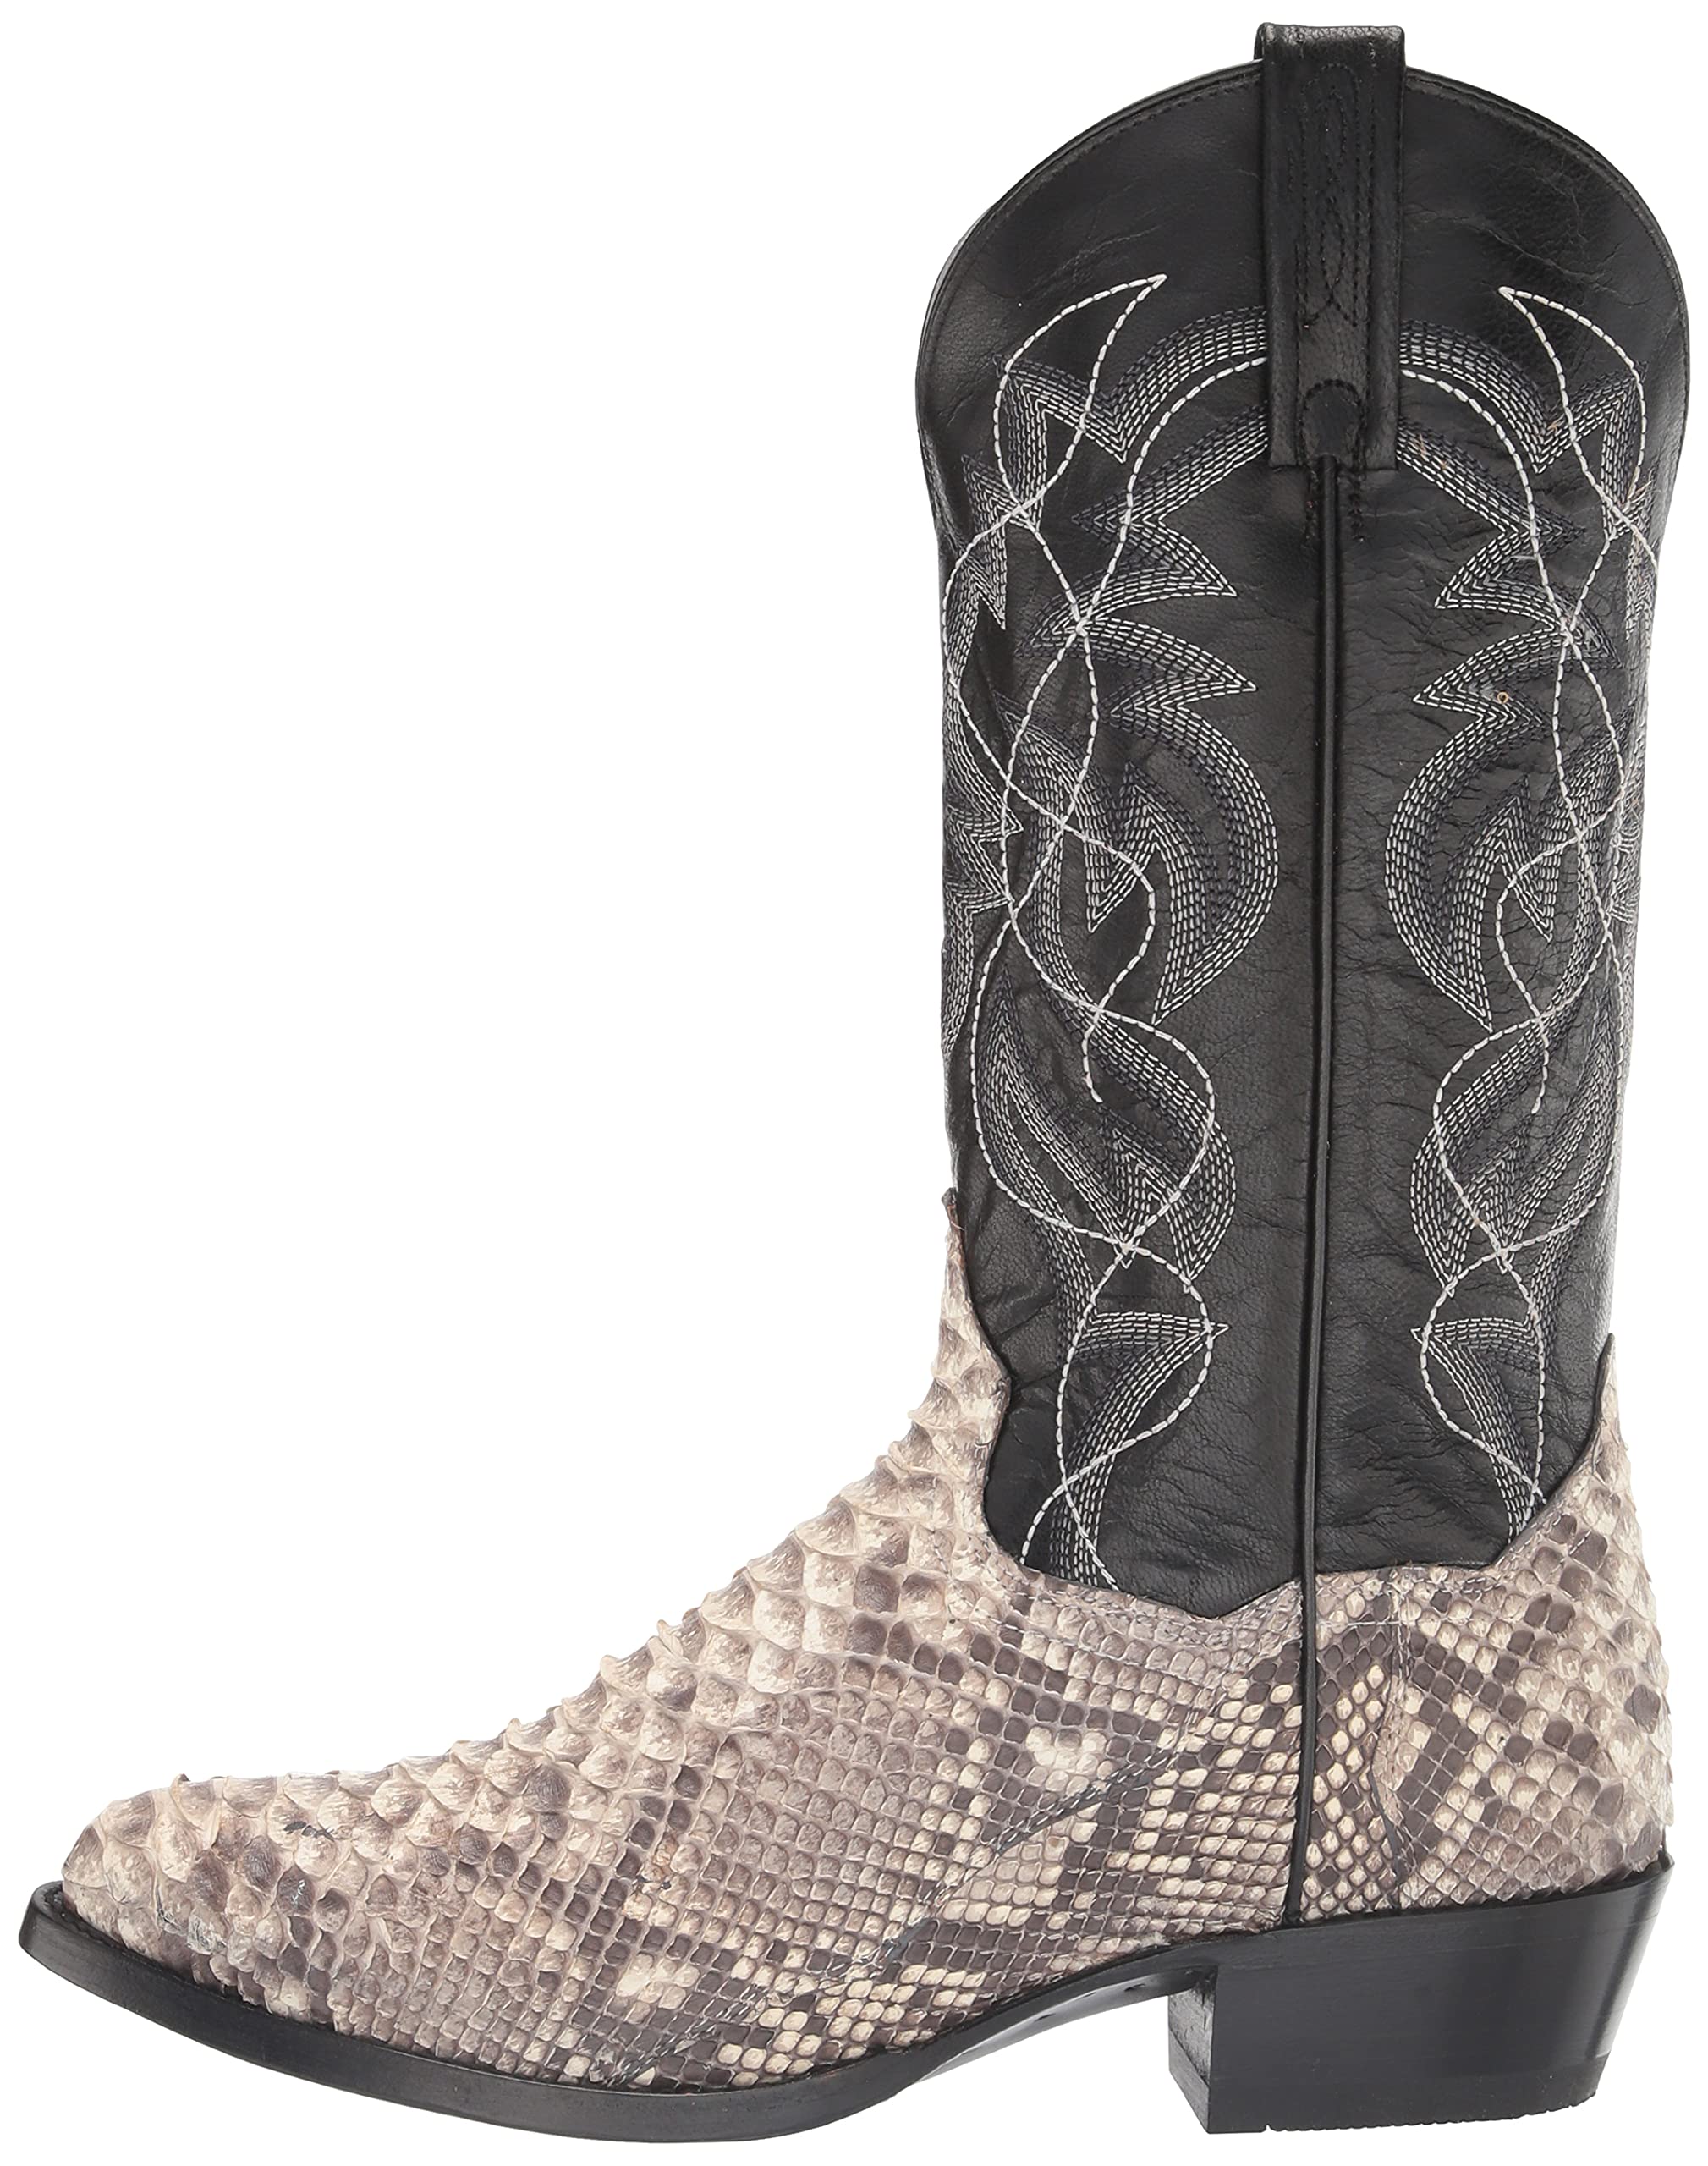 Dan Post Boots Mens Manning Snakeskin Round Toe Boots Mid Calf - Black